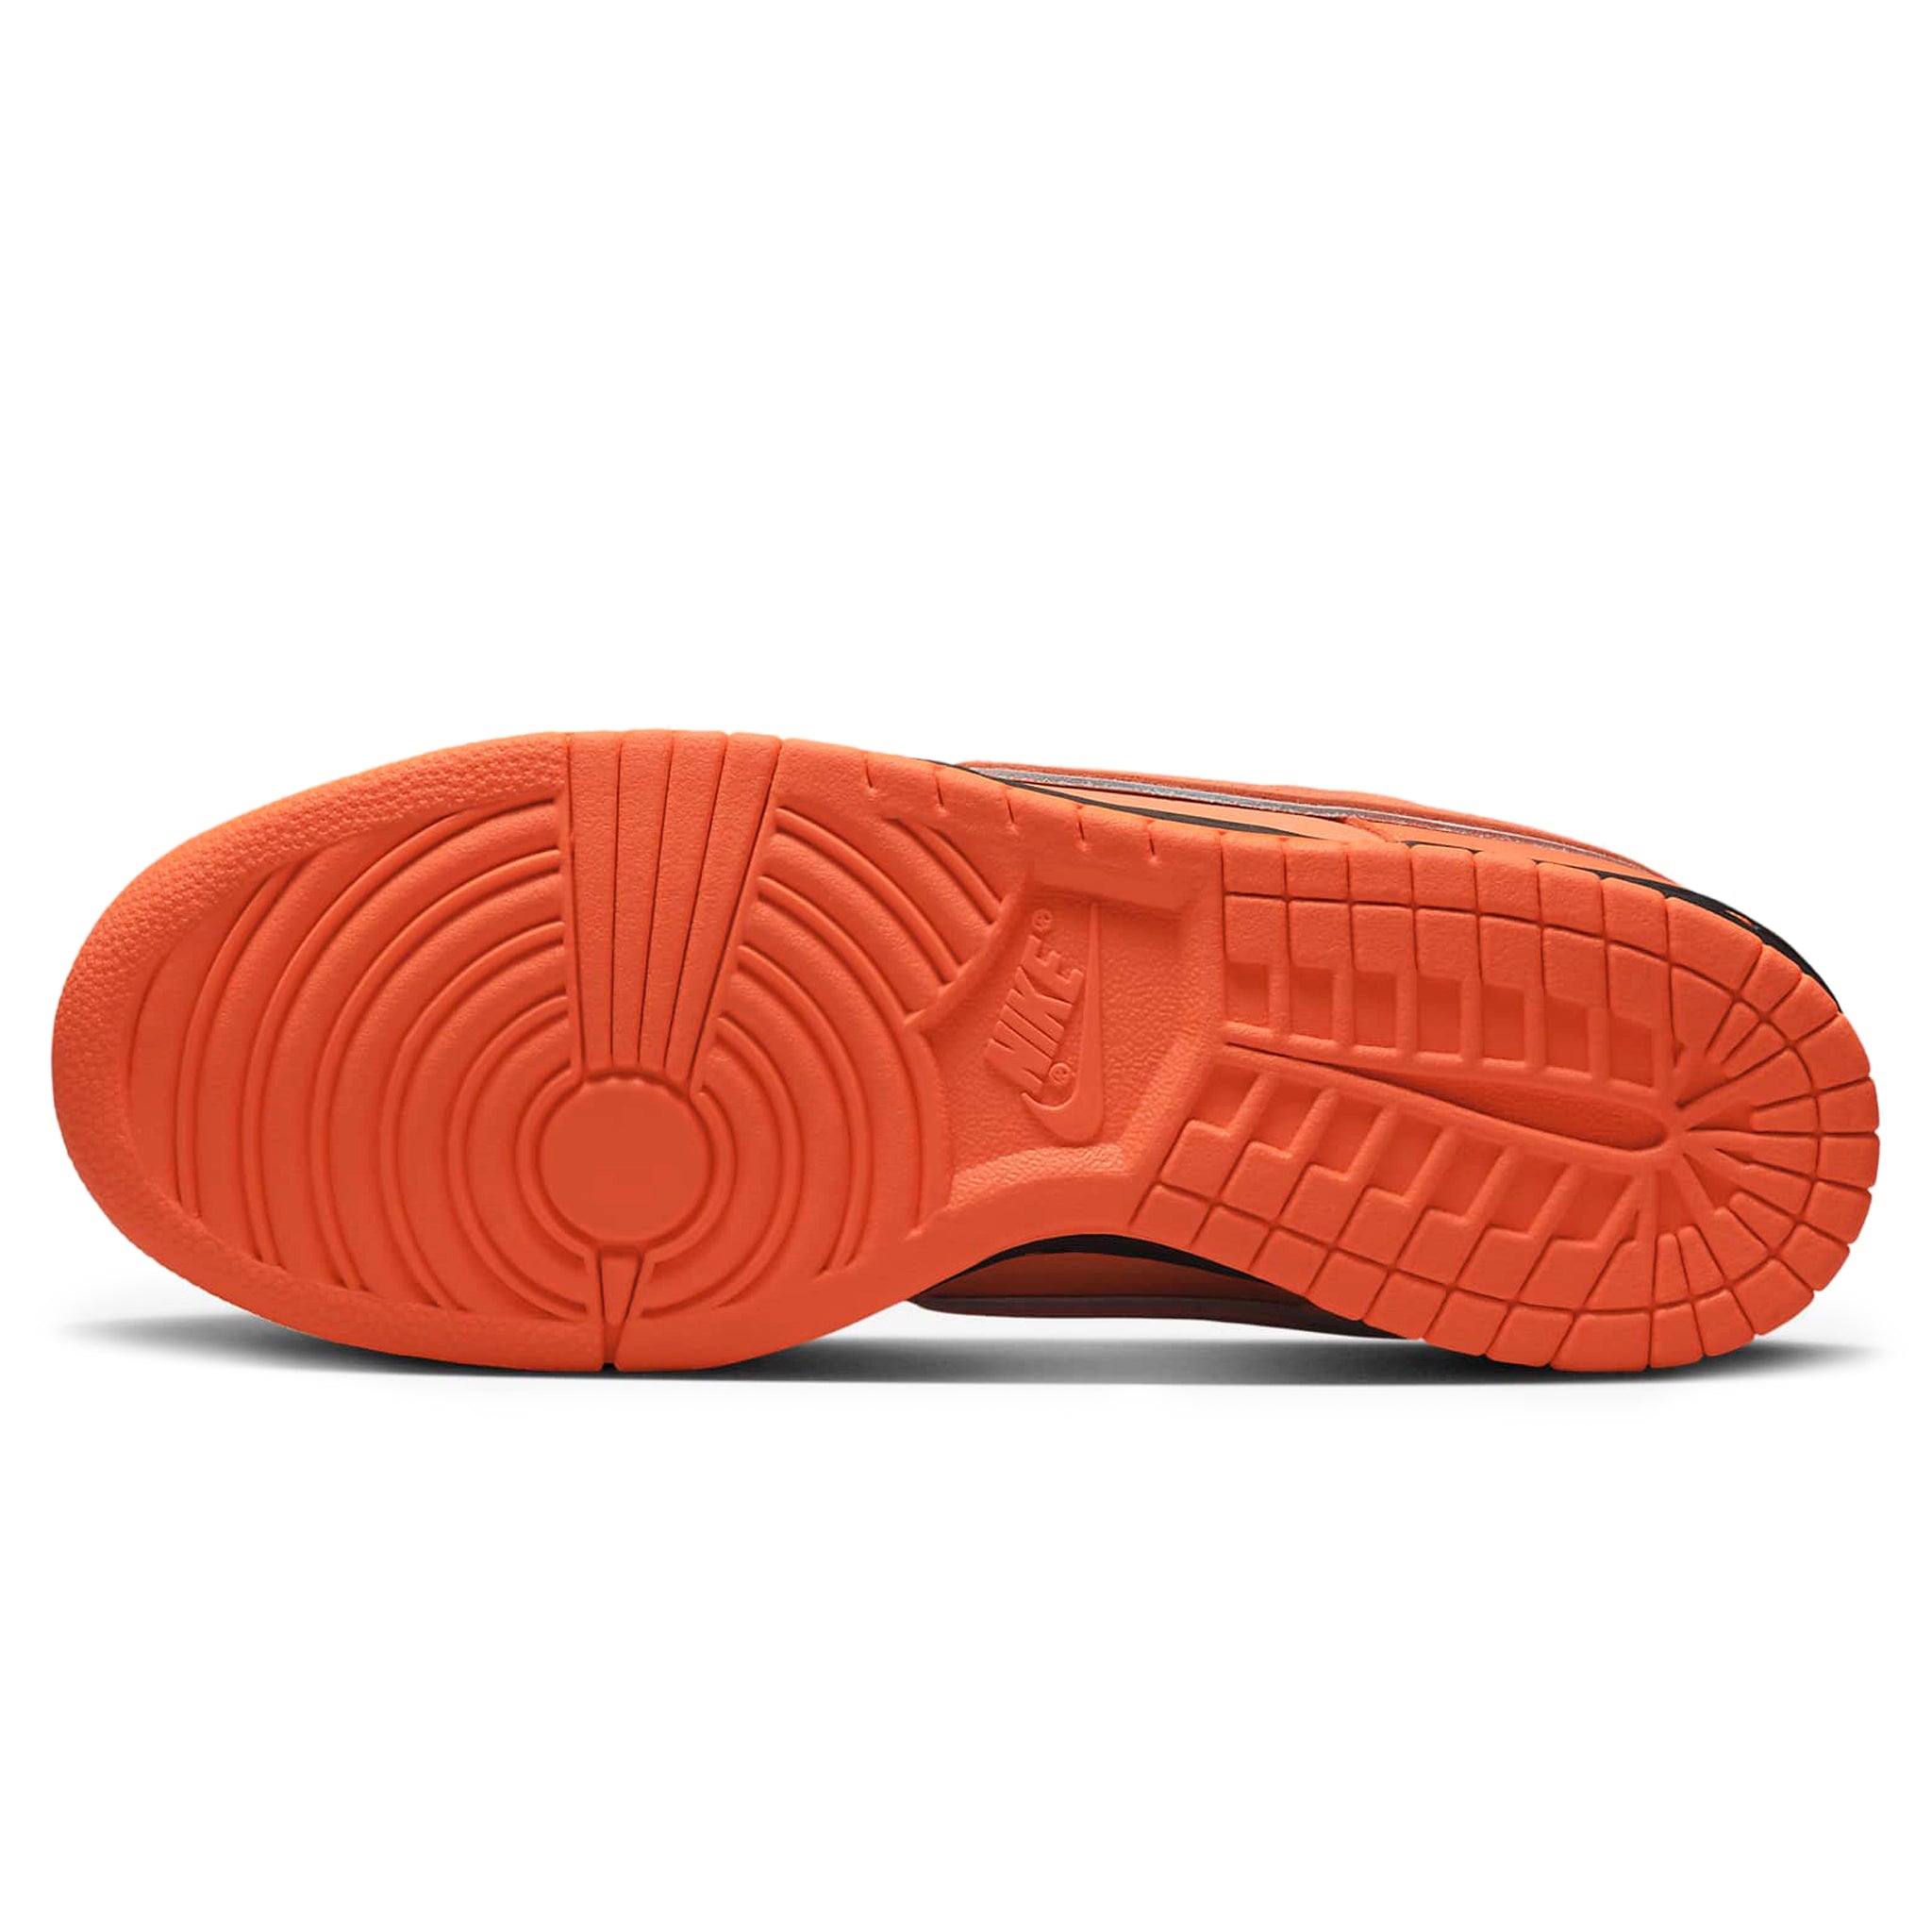 Sole view of Nike SB Dunk Low Concepts Orange Lobster FD8776-800